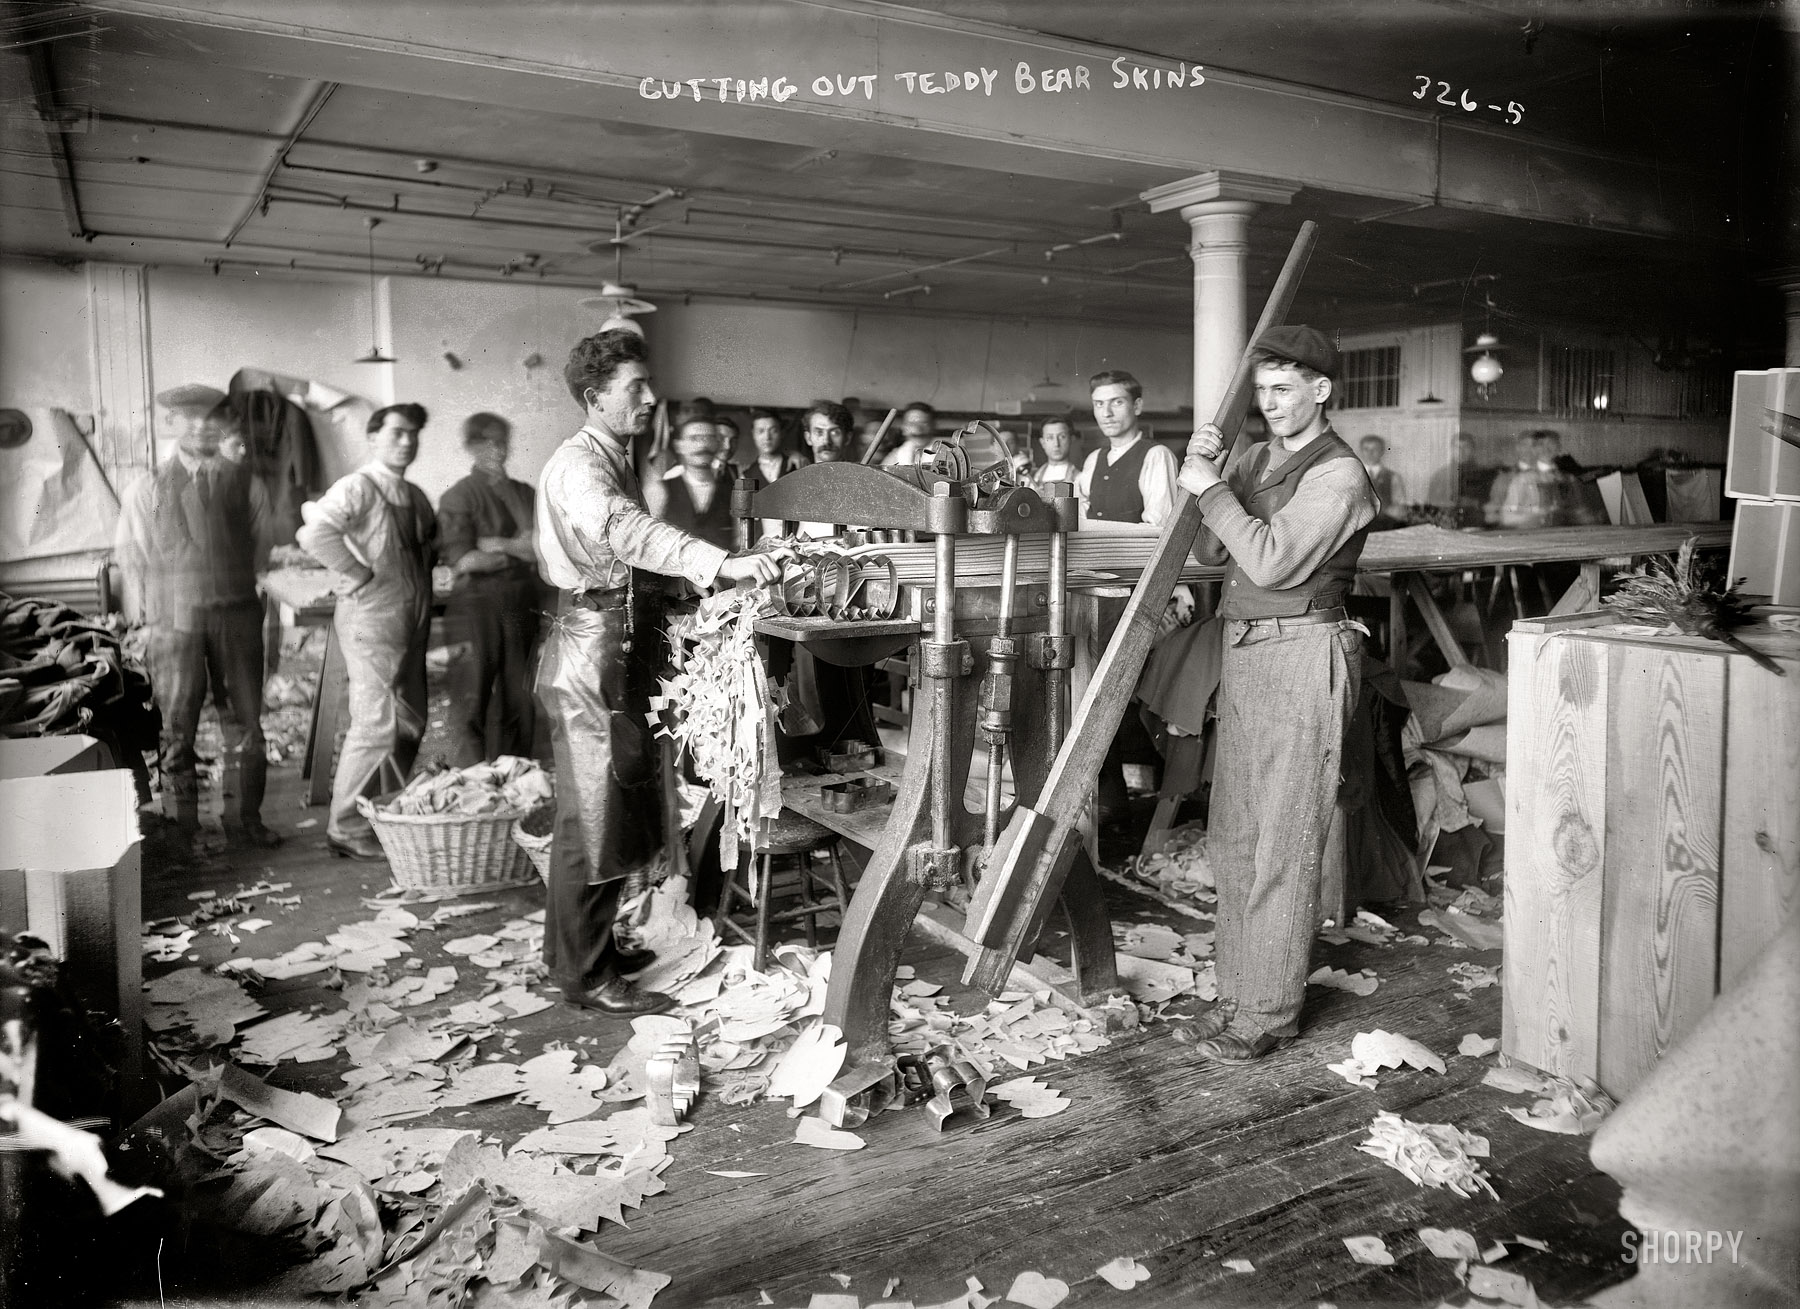 New York circa 1908. "Cutting out teddy bear skins." 8x10 glass negative, George Grantham Bain Collection. View full size.